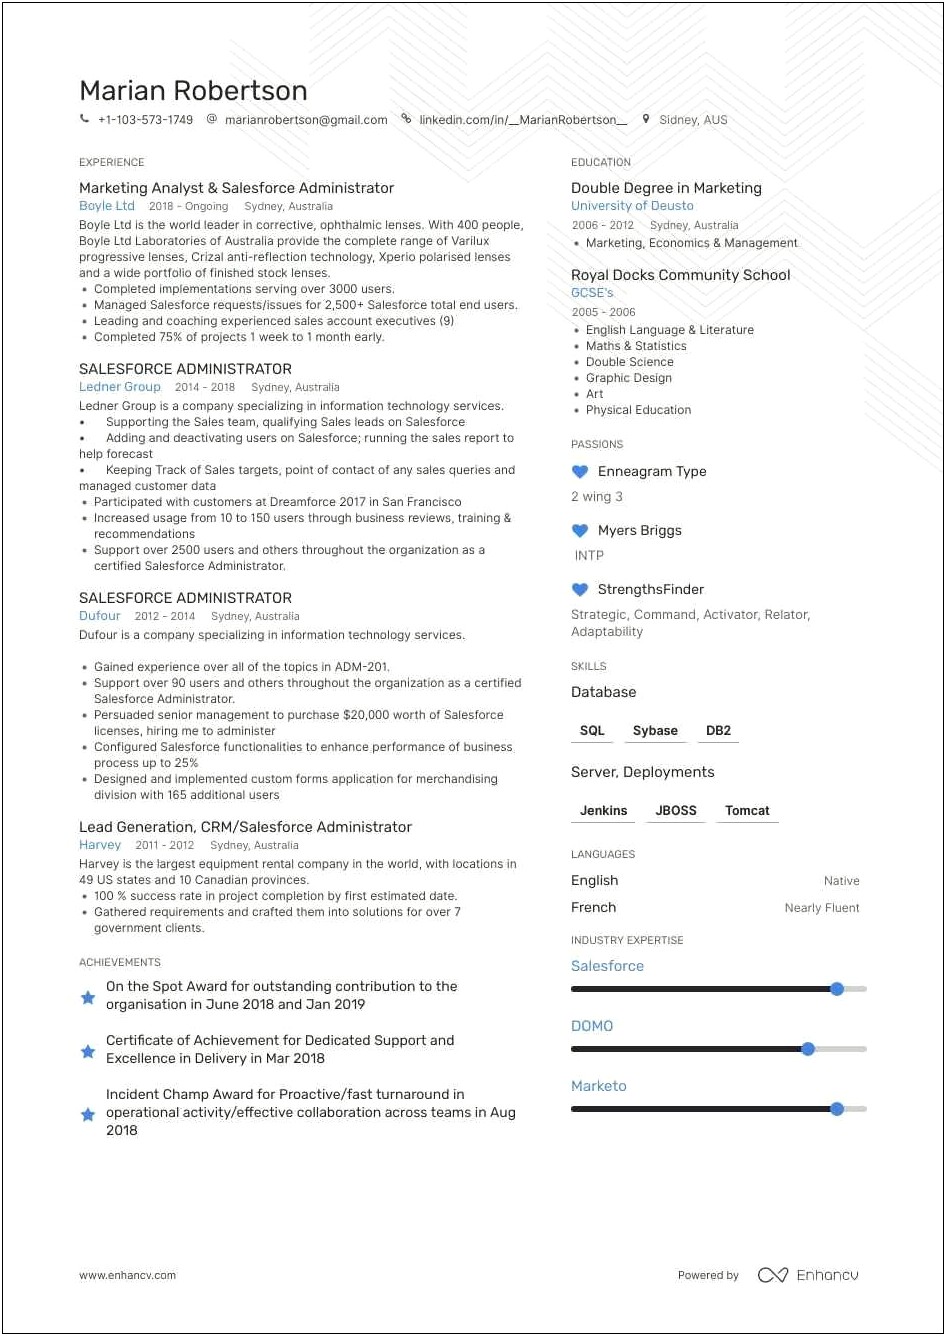 Salesforce Lead With Apptus Resumes Samples